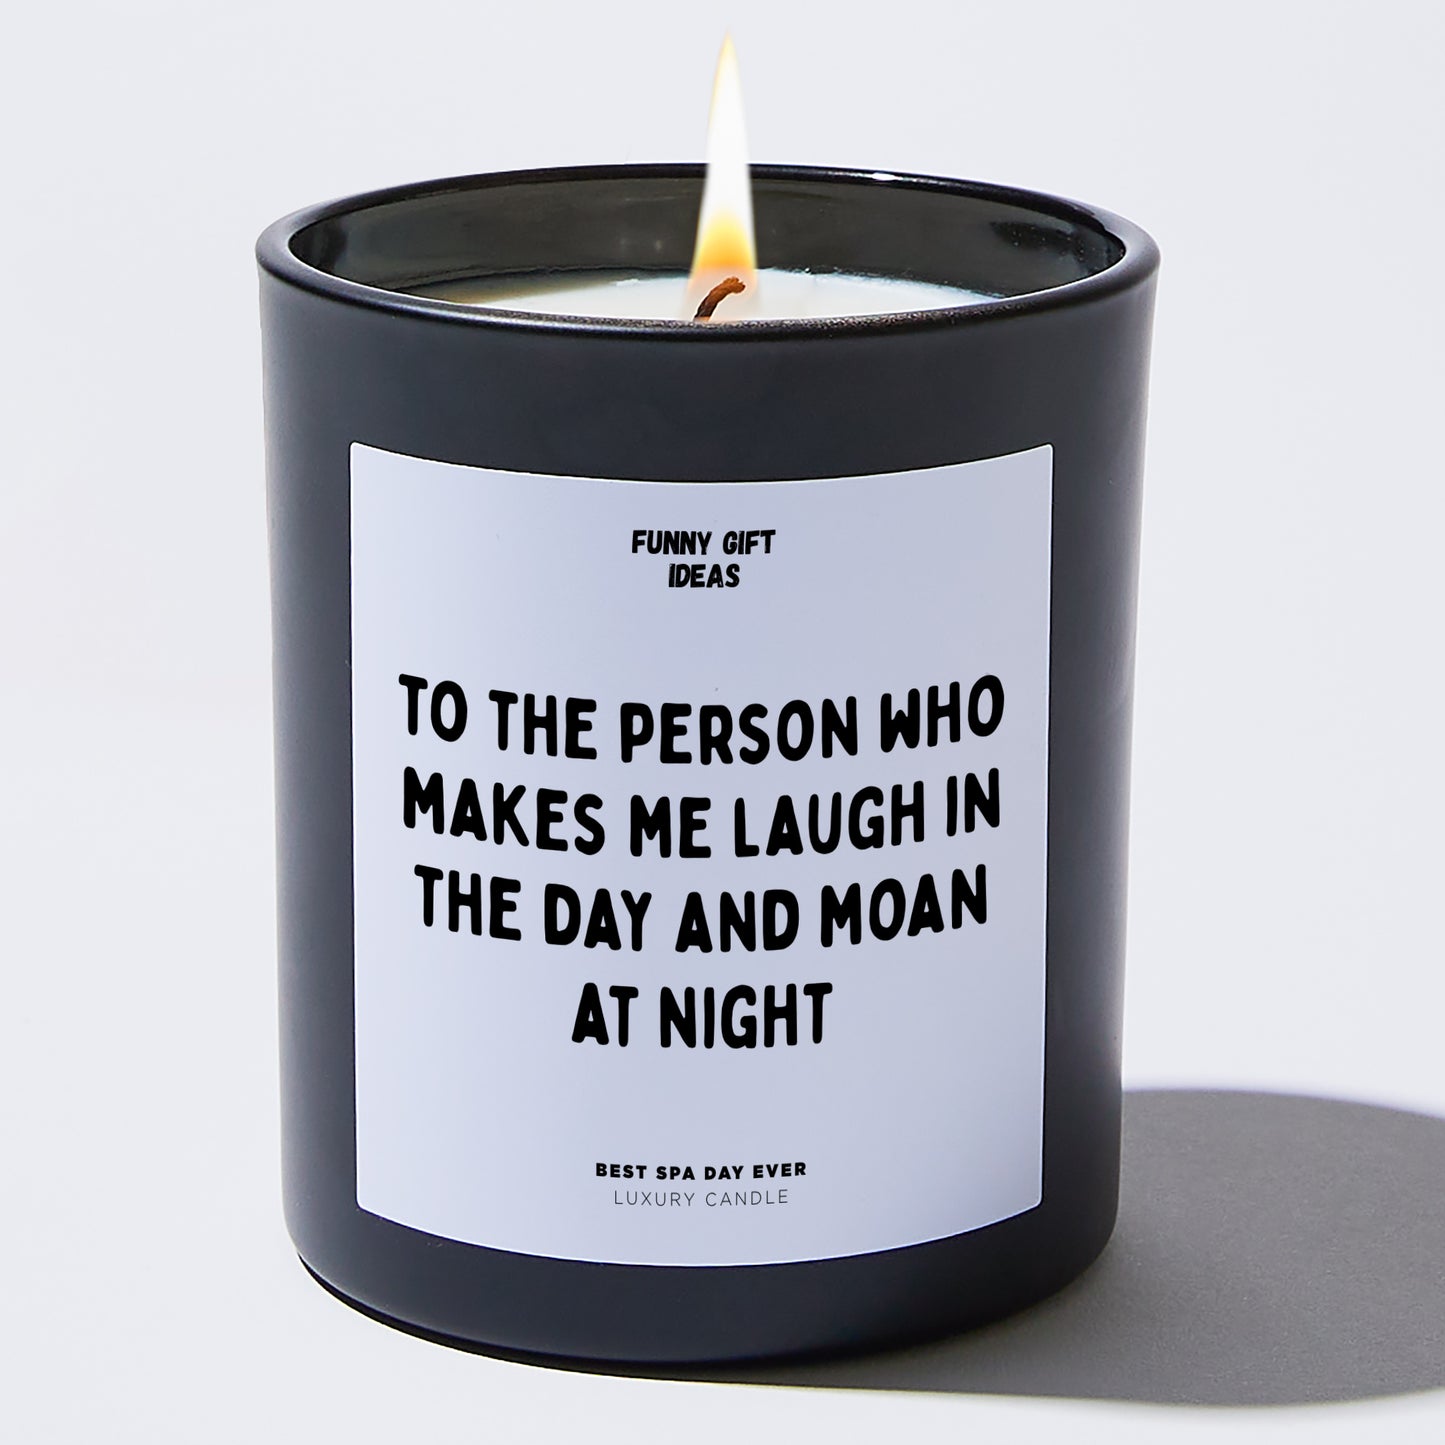 Anniversary Present - To the Person Who Makes Me Laugh in the Day and M--n at Night - Candle